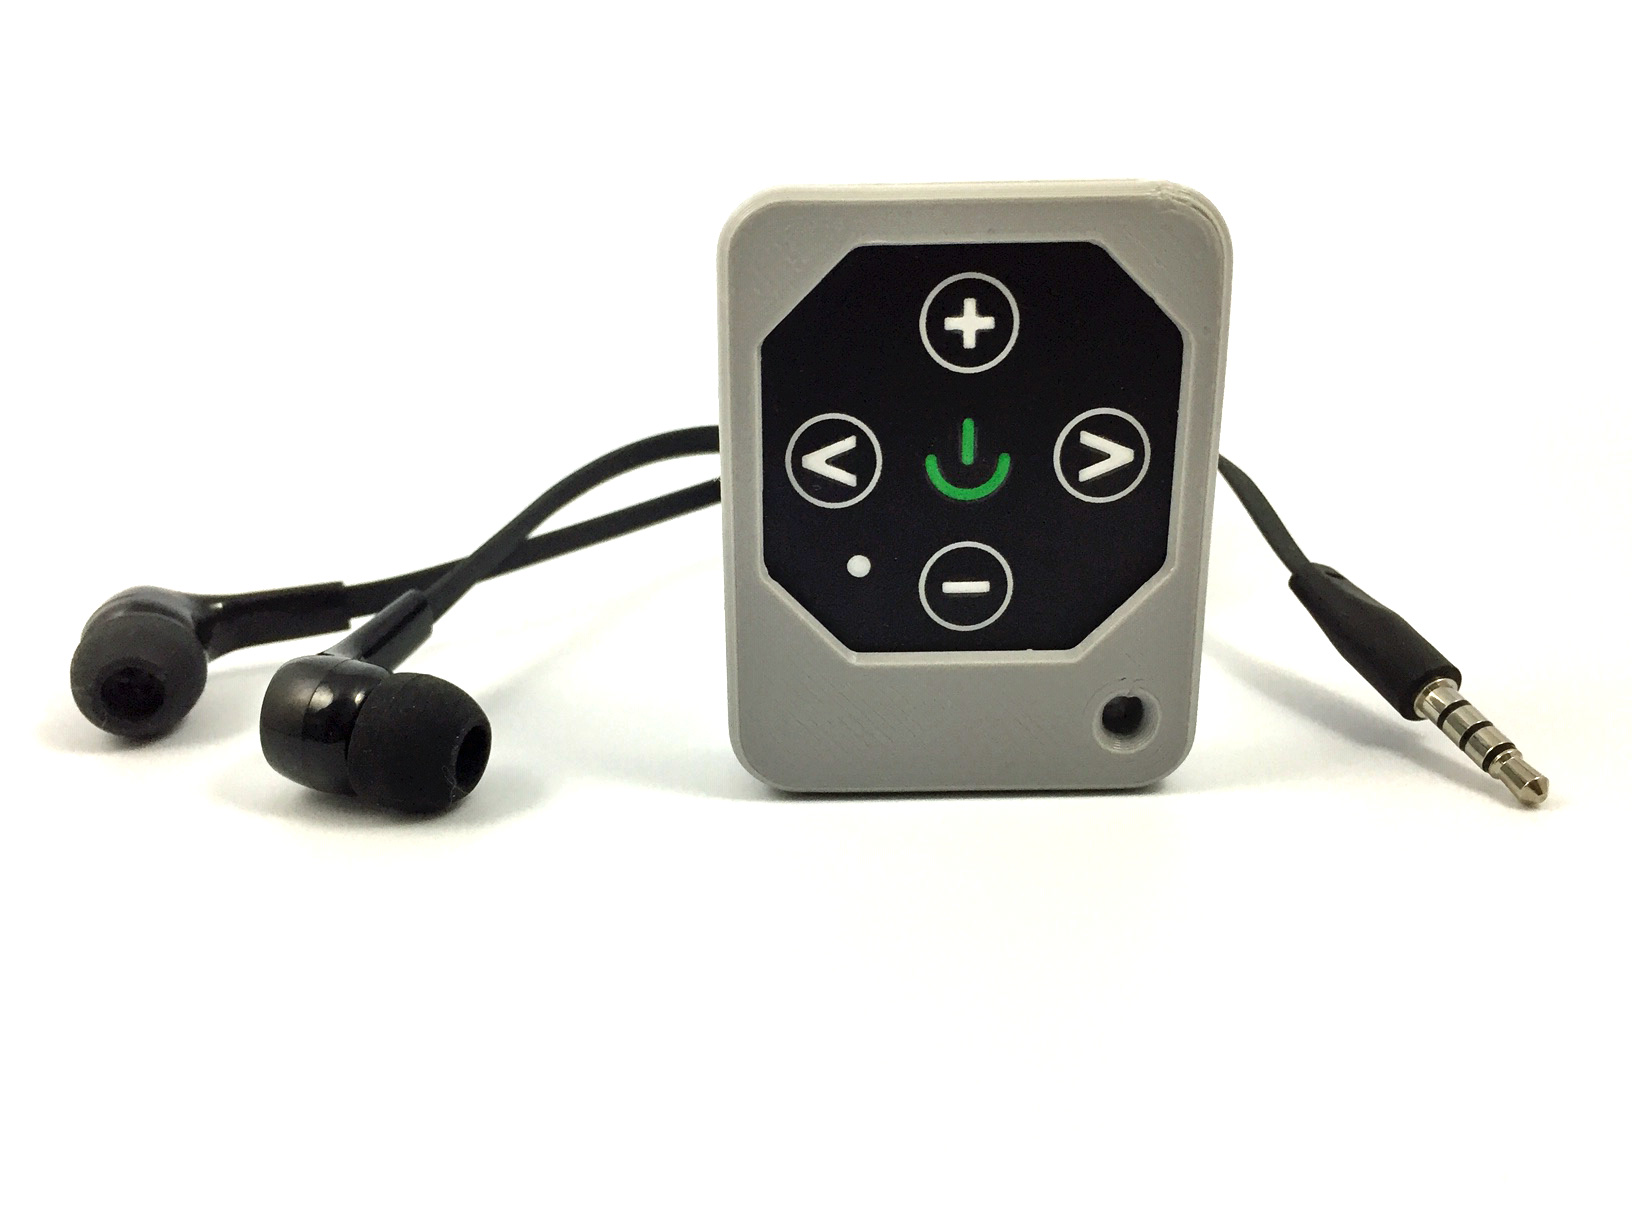 SeedPlayer personal, gray, with earbuds